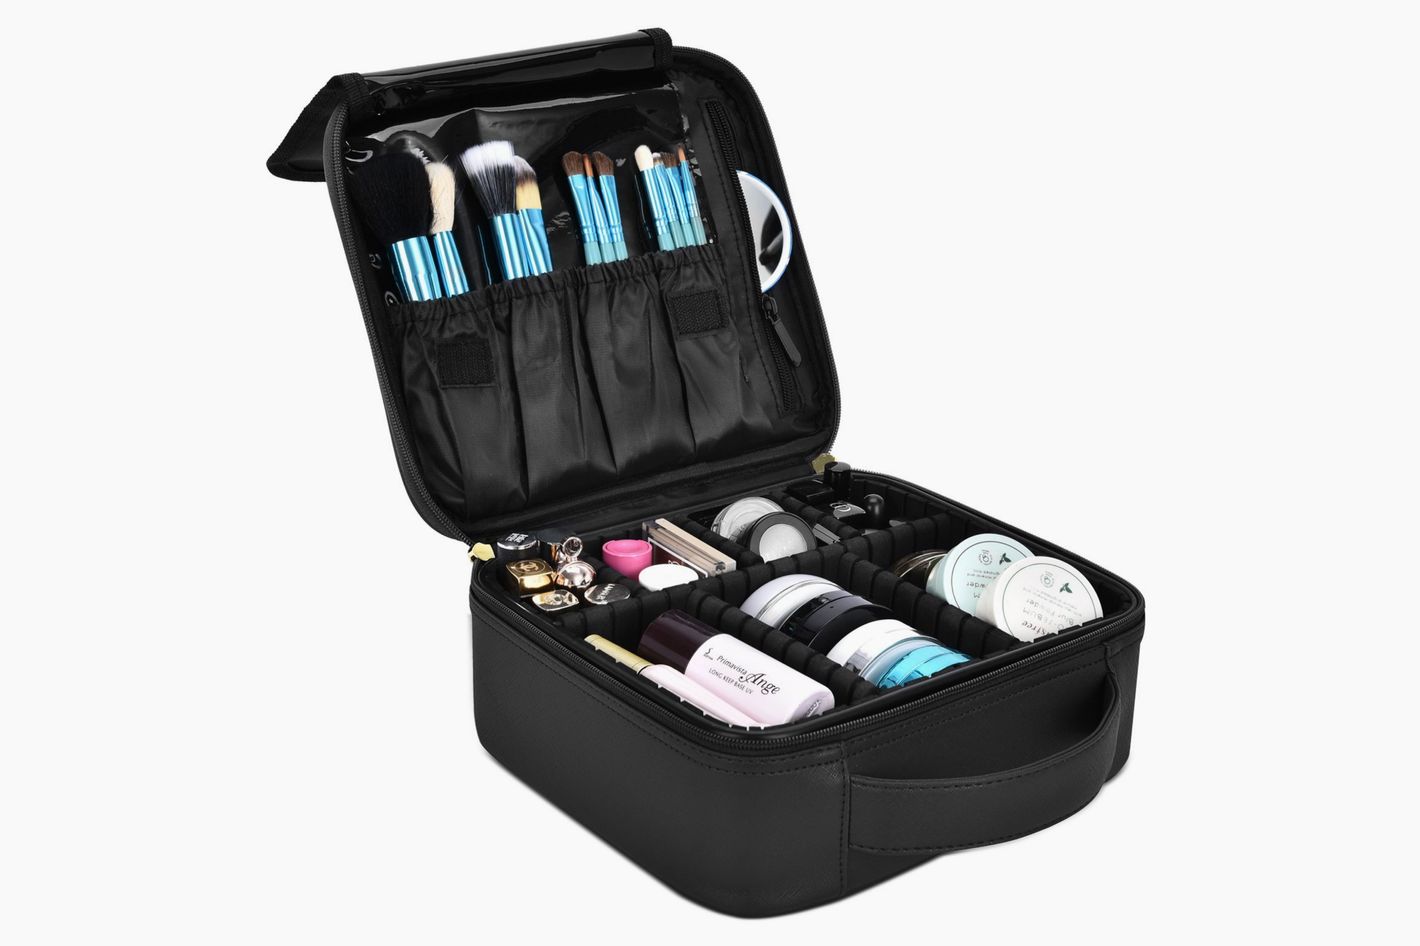 The 10 Best Makeup Bags for Makeup & Cosmetics 2019